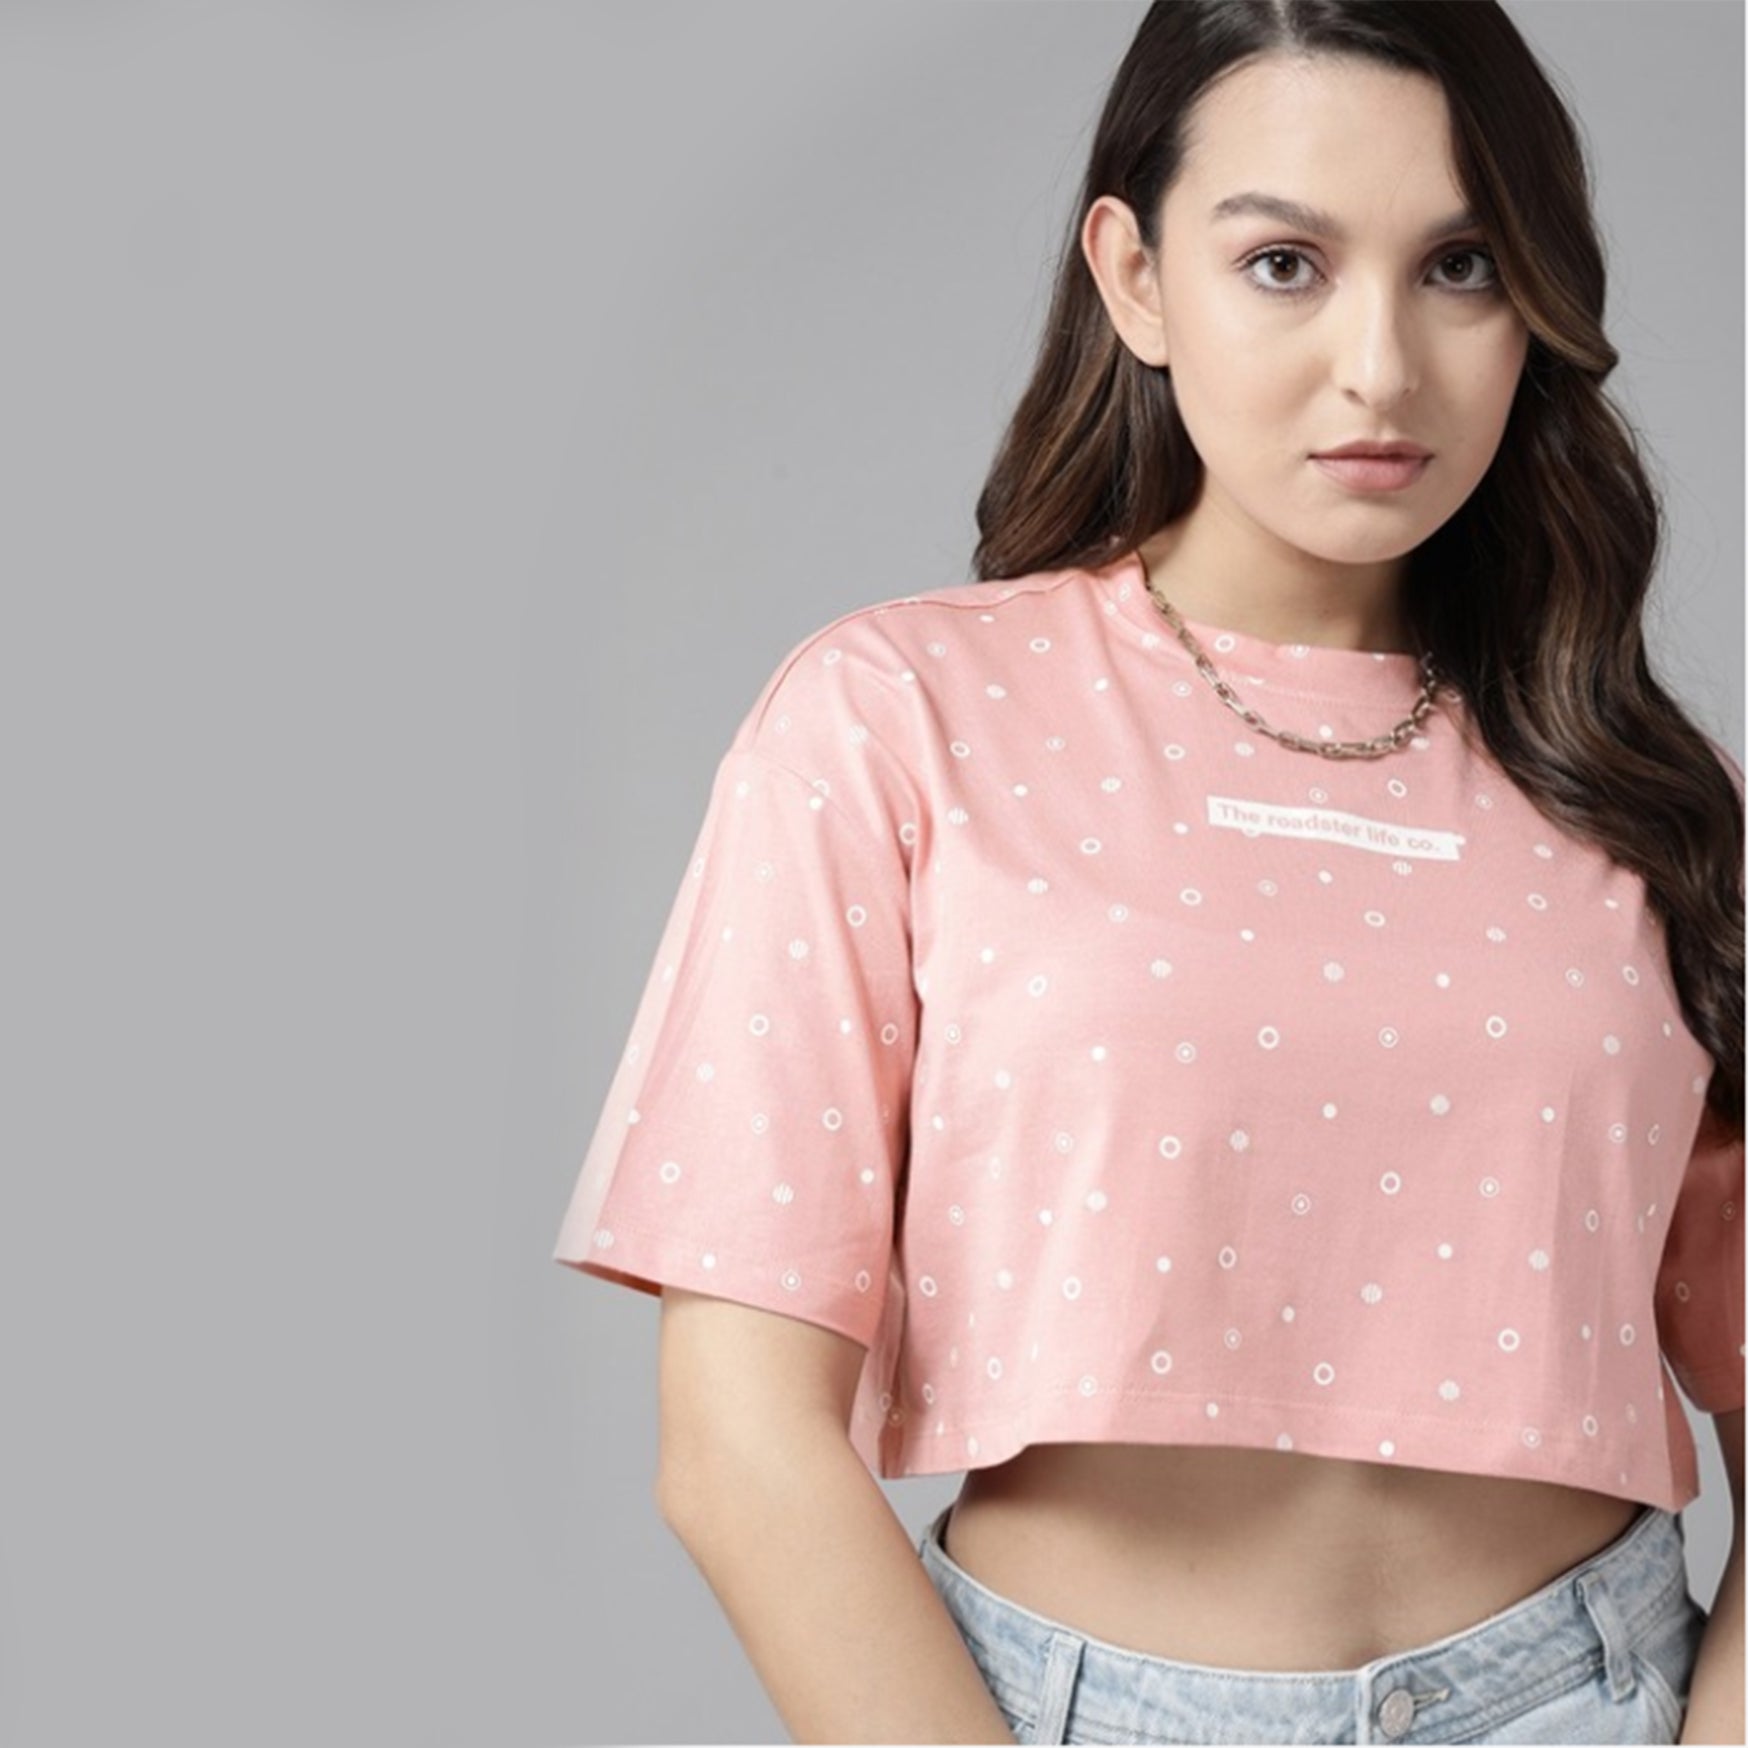 The Lifestyle Co. Brand Logo Printed Pure Cotton Boxy Super Crop T-shirt